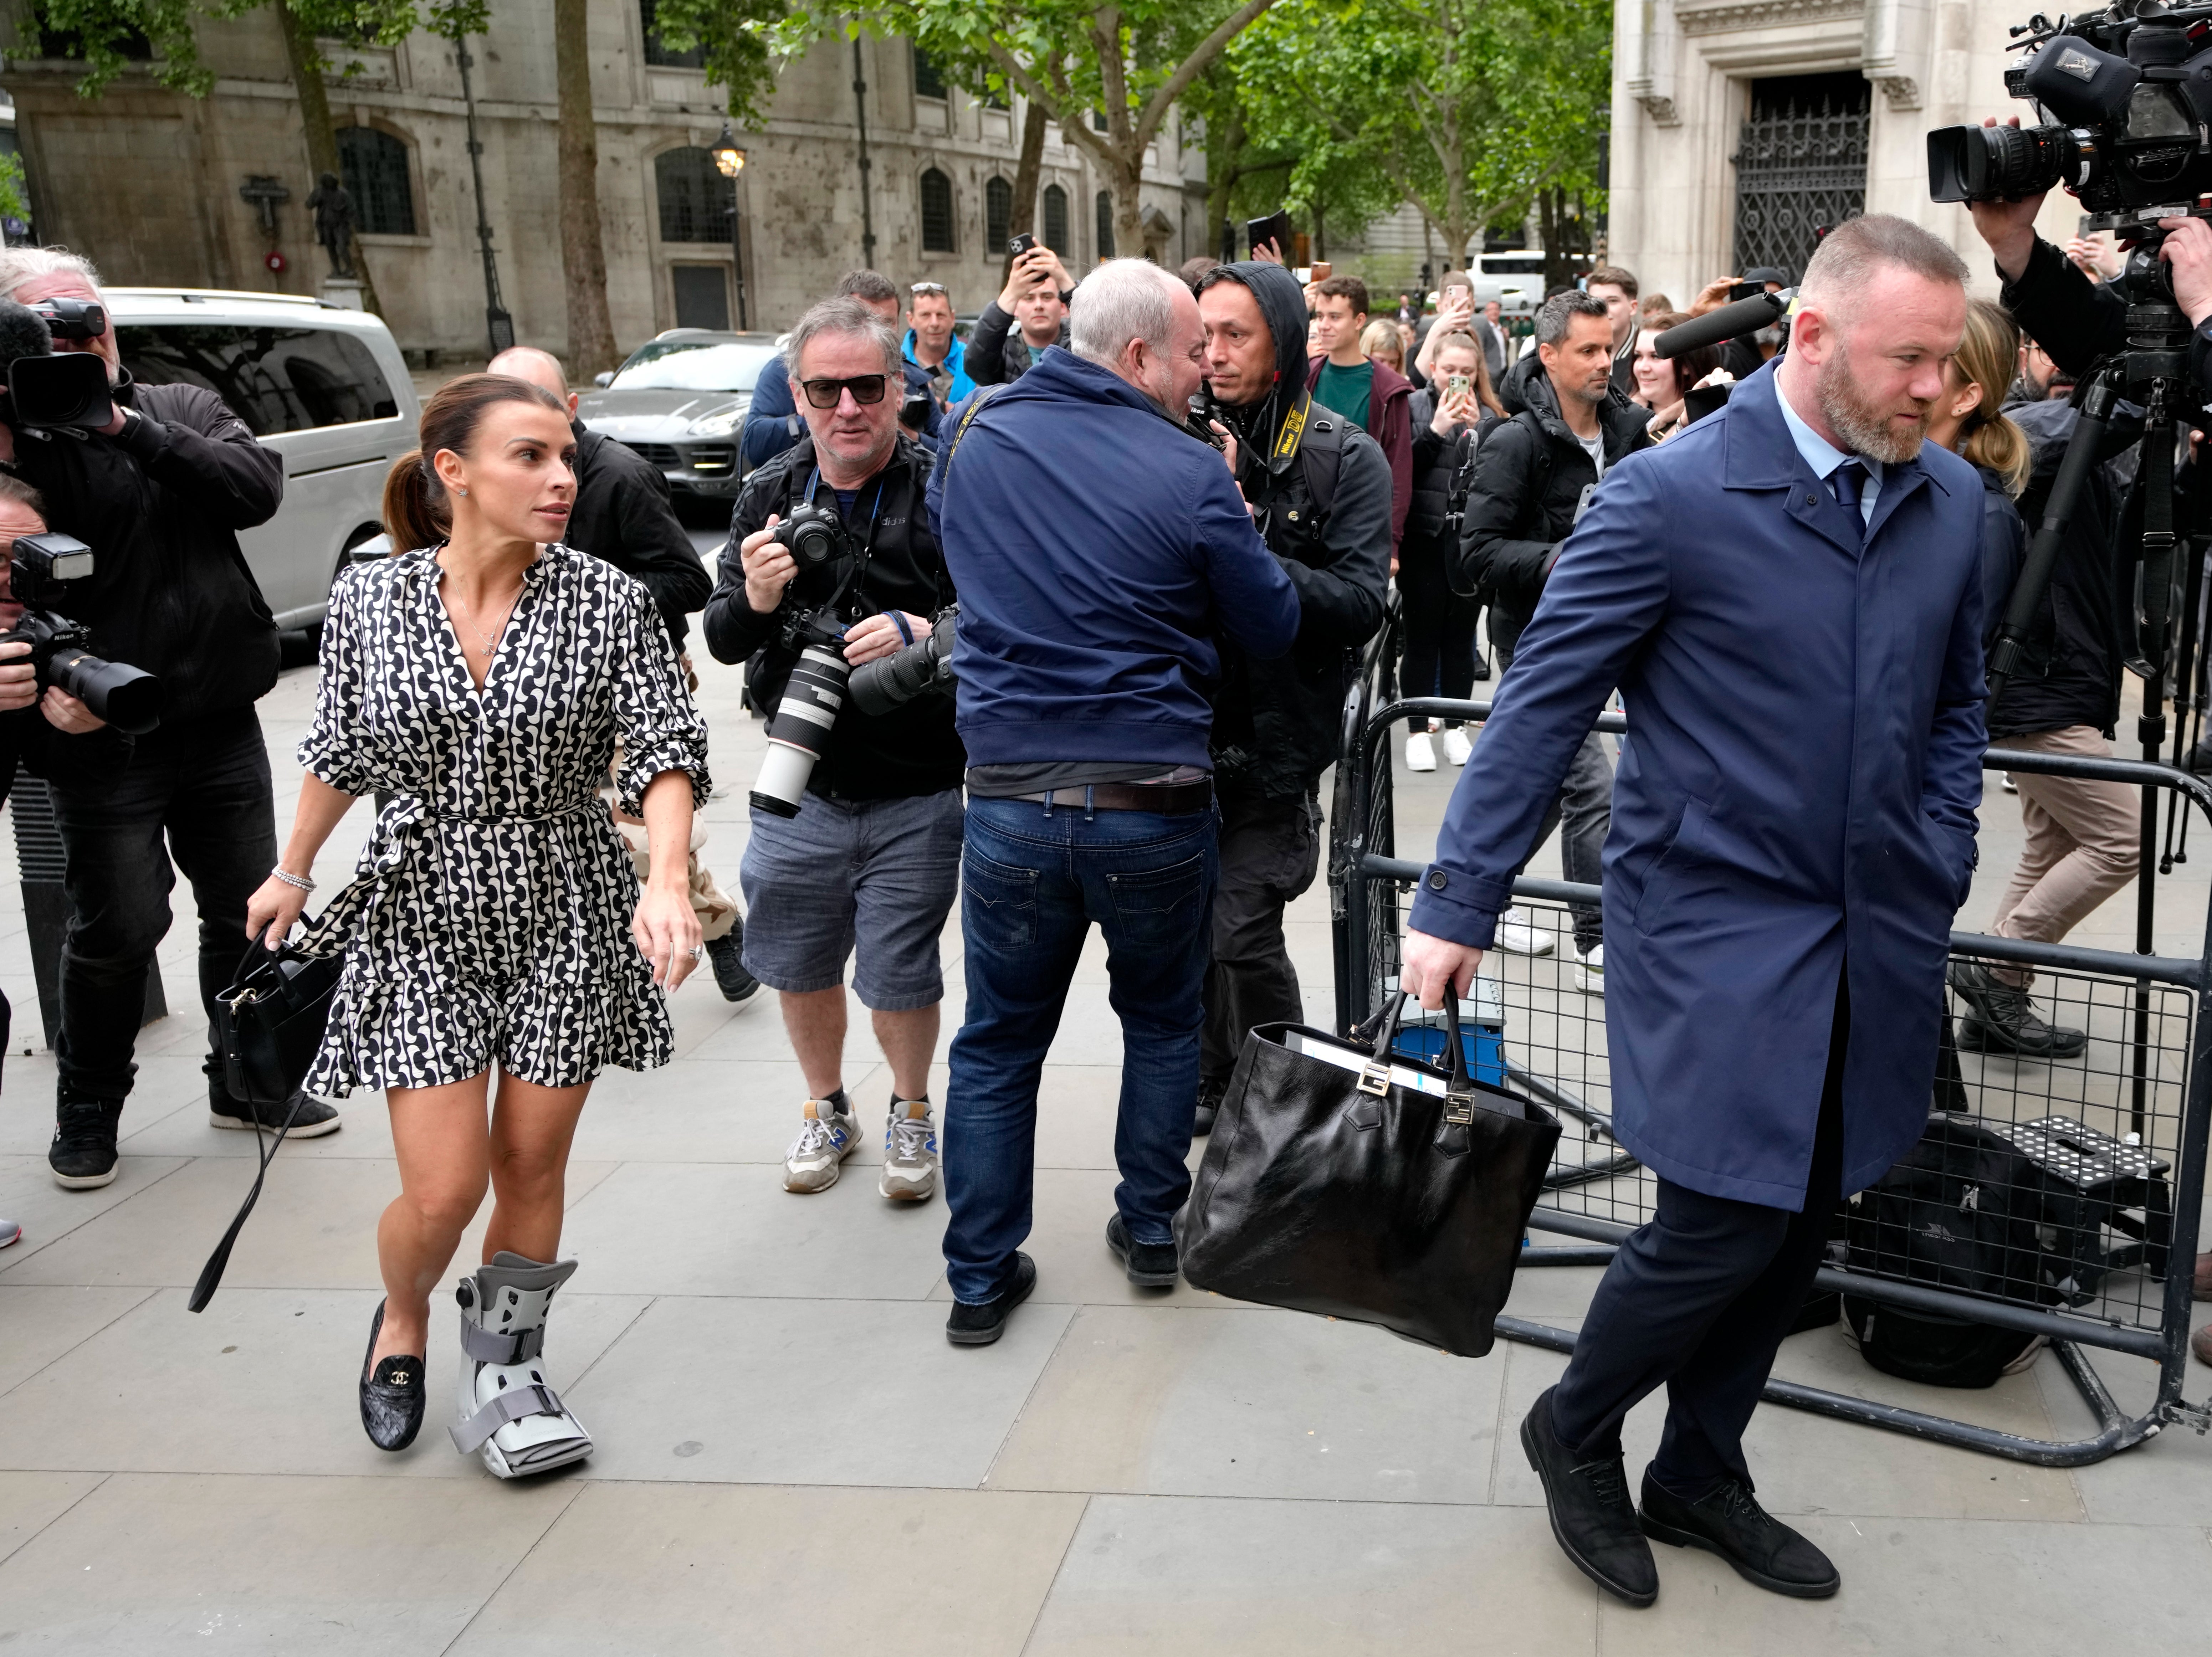 Coleen Rooney and her husband Wayne arrive at the High Court in London for the second day of the libel hearing